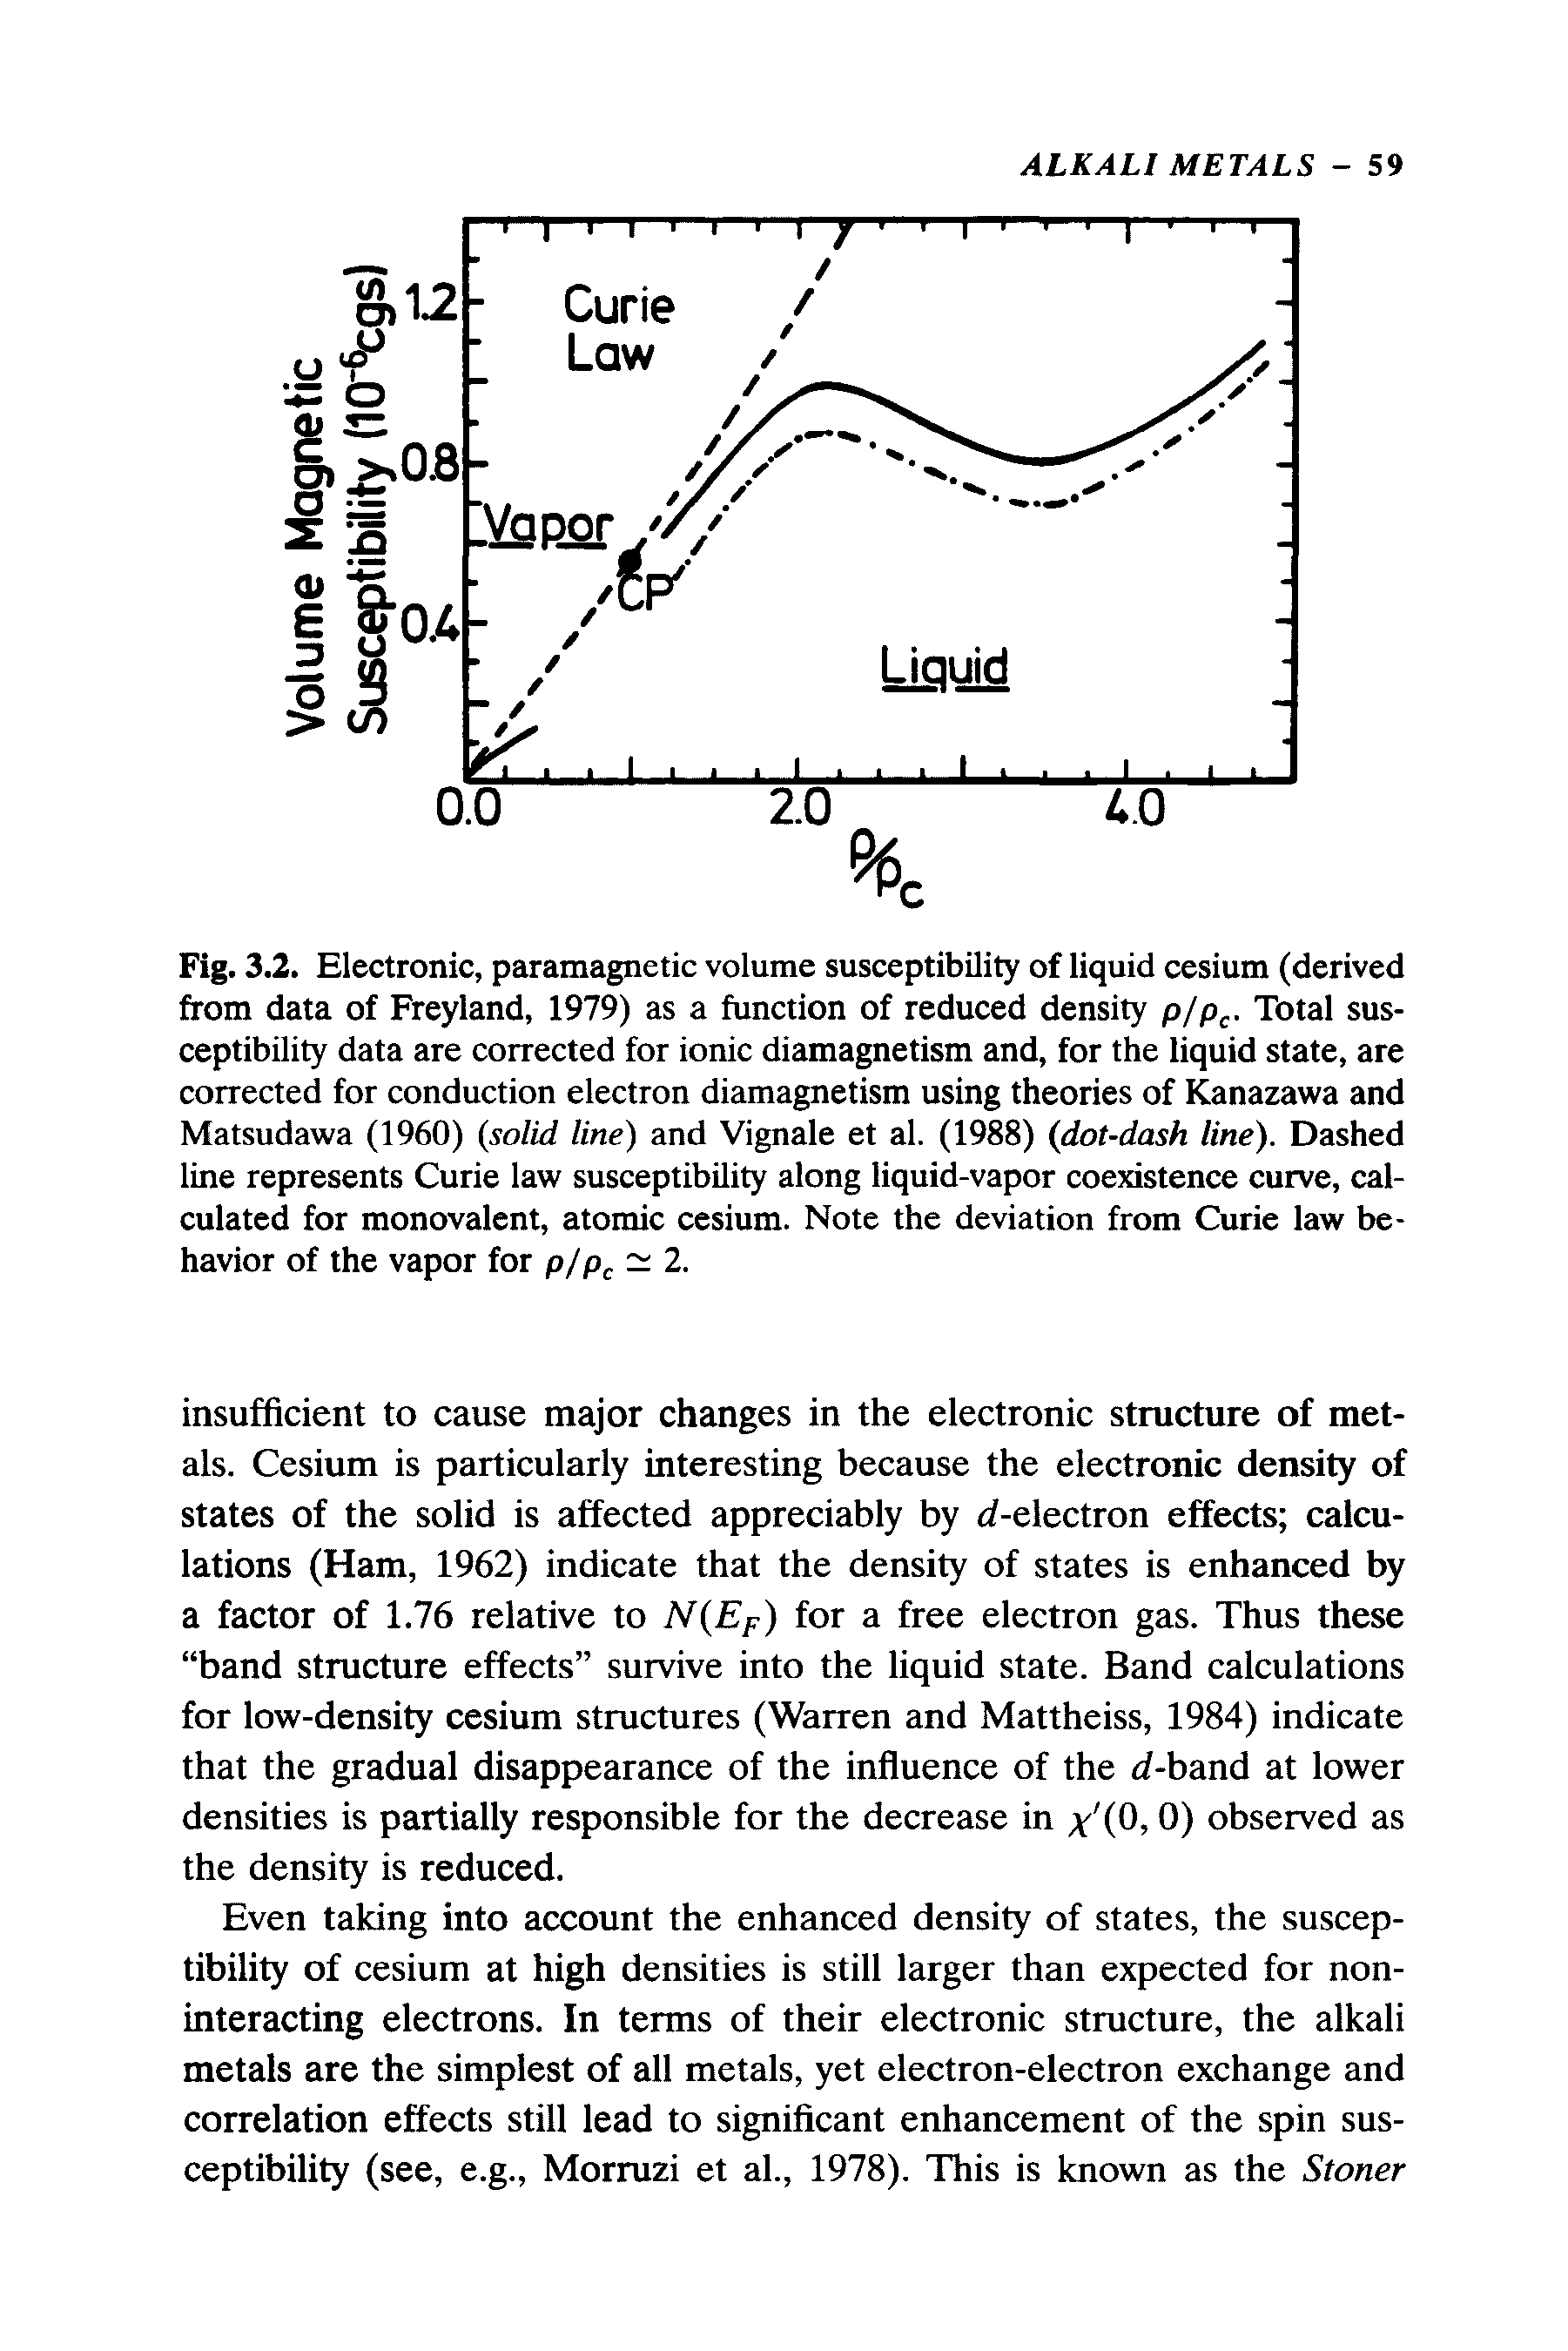 Fig. 3.2. Electronic, paramagnetic volume susceptibility of liquid cesium (derived from data of Preyland, 1979) as a function of reduced density p/p. Total susceptibility data are corrected for ionic diamagnetism and, for the liquid state, are corrected for conduction electron diamagnetism using theories of I nazawa and Matsudawa (1960) solid line) and Vignale et al. (1988) dot-dash line). Dashed line represents Curie law susceptibility along liquid-vapor coexistence curve, calculated for monovalent, atomic cesium. Note the deviation from Curie law behavior of the vapor for p/p. 2.